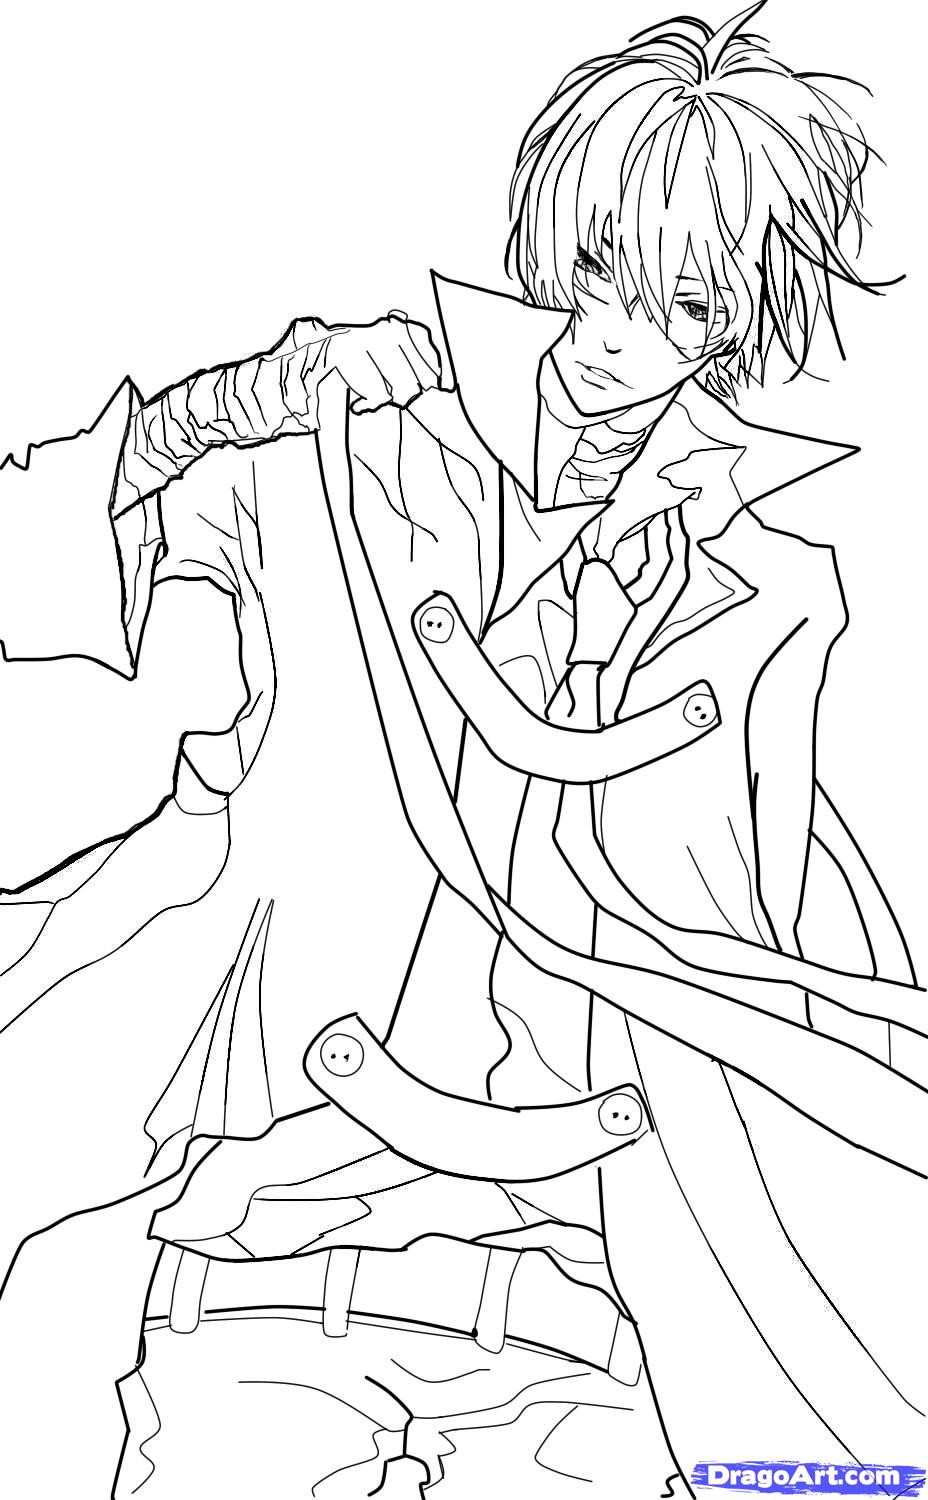 Anime Boys Coloring Pages
 How to Sketch an Anime Boy Step by Step Anime People